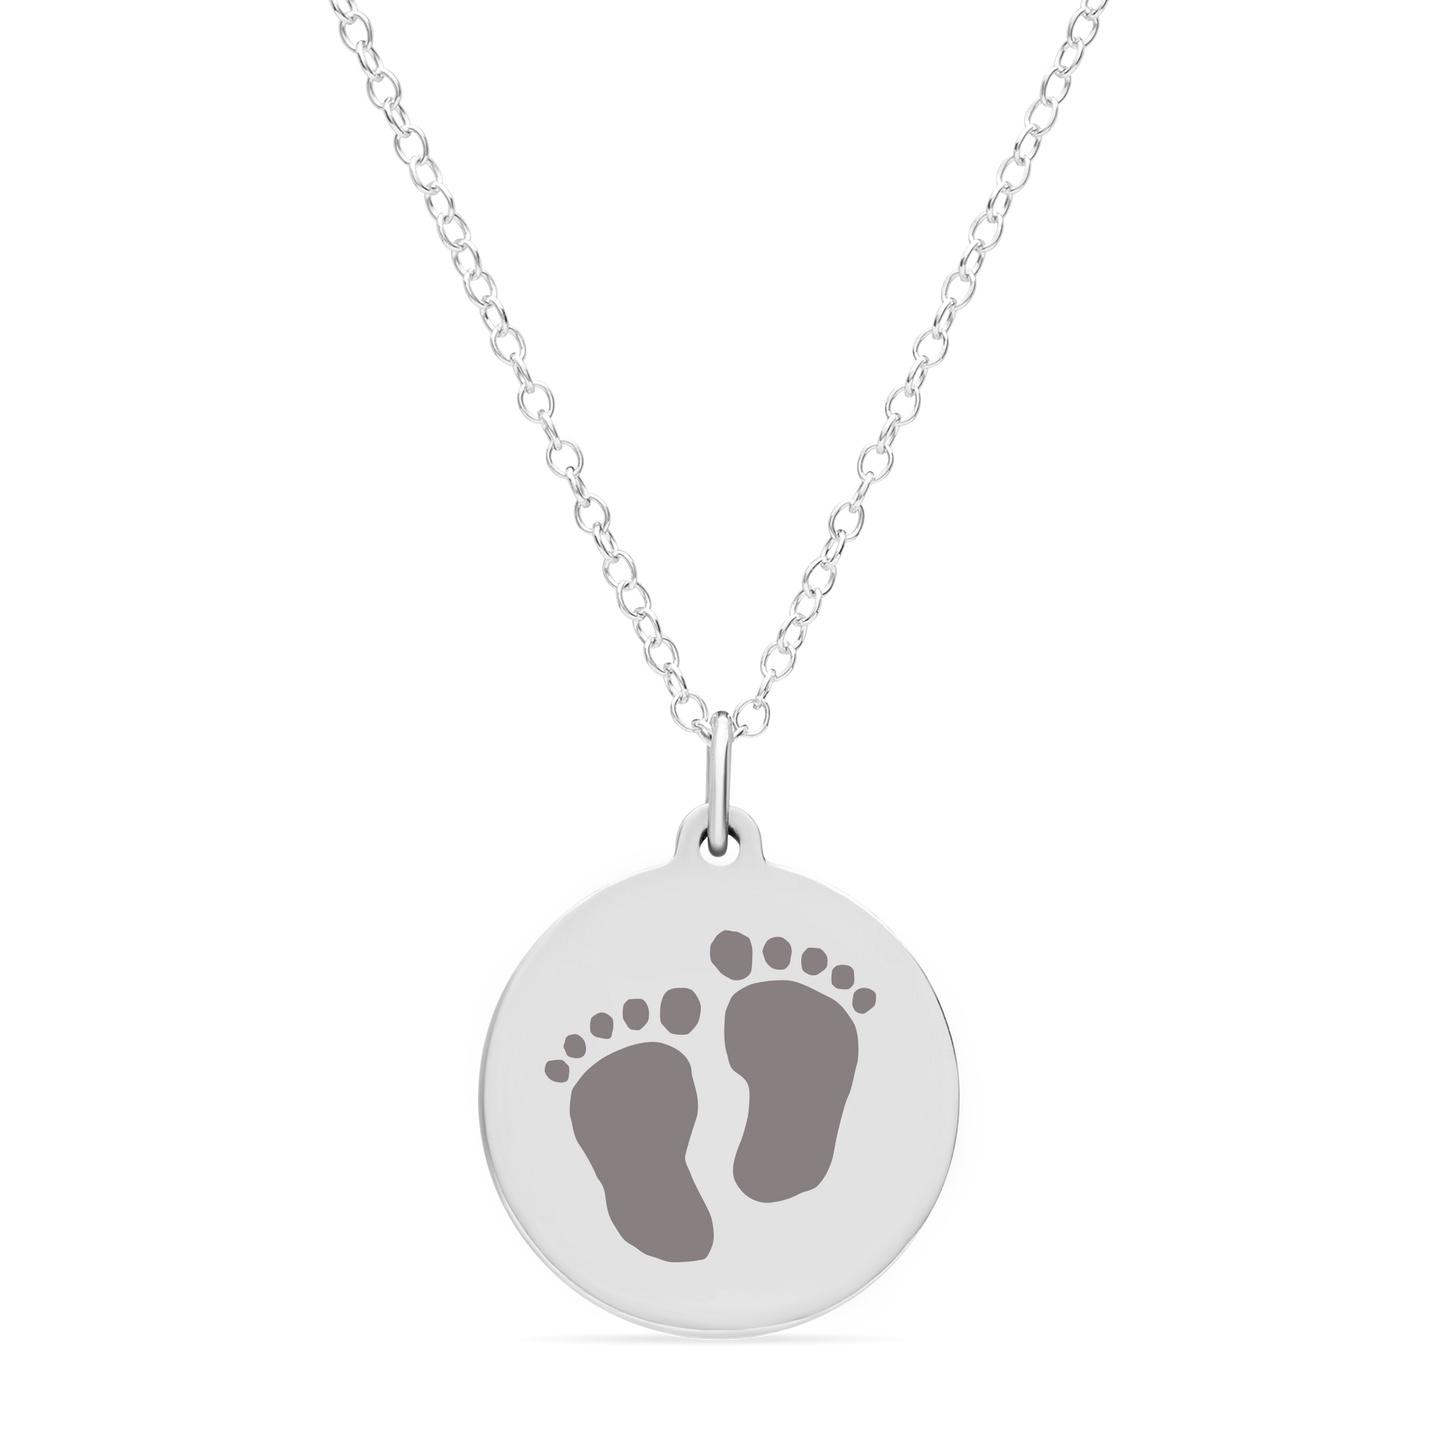 ORIGINAL BABYFEET CHARM in sterling silver with rhodium plate